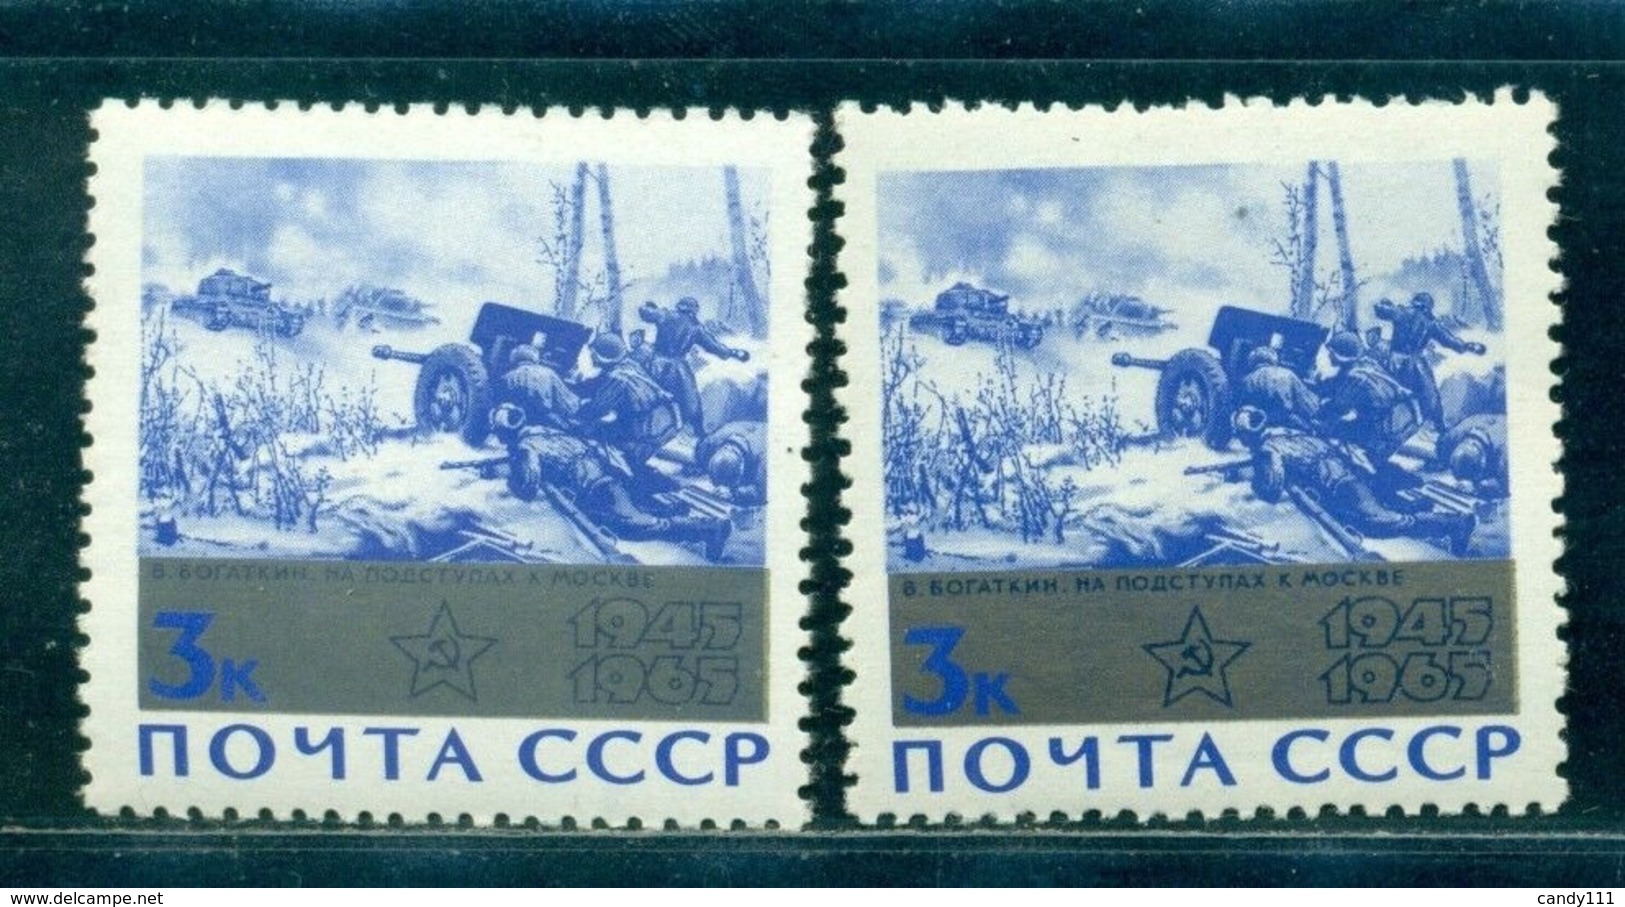 1965 Victory,20th Ann,On Approaches To Moscow/Bogatkin,Russia,3053ab,MNH,variety - Errors & Oddities